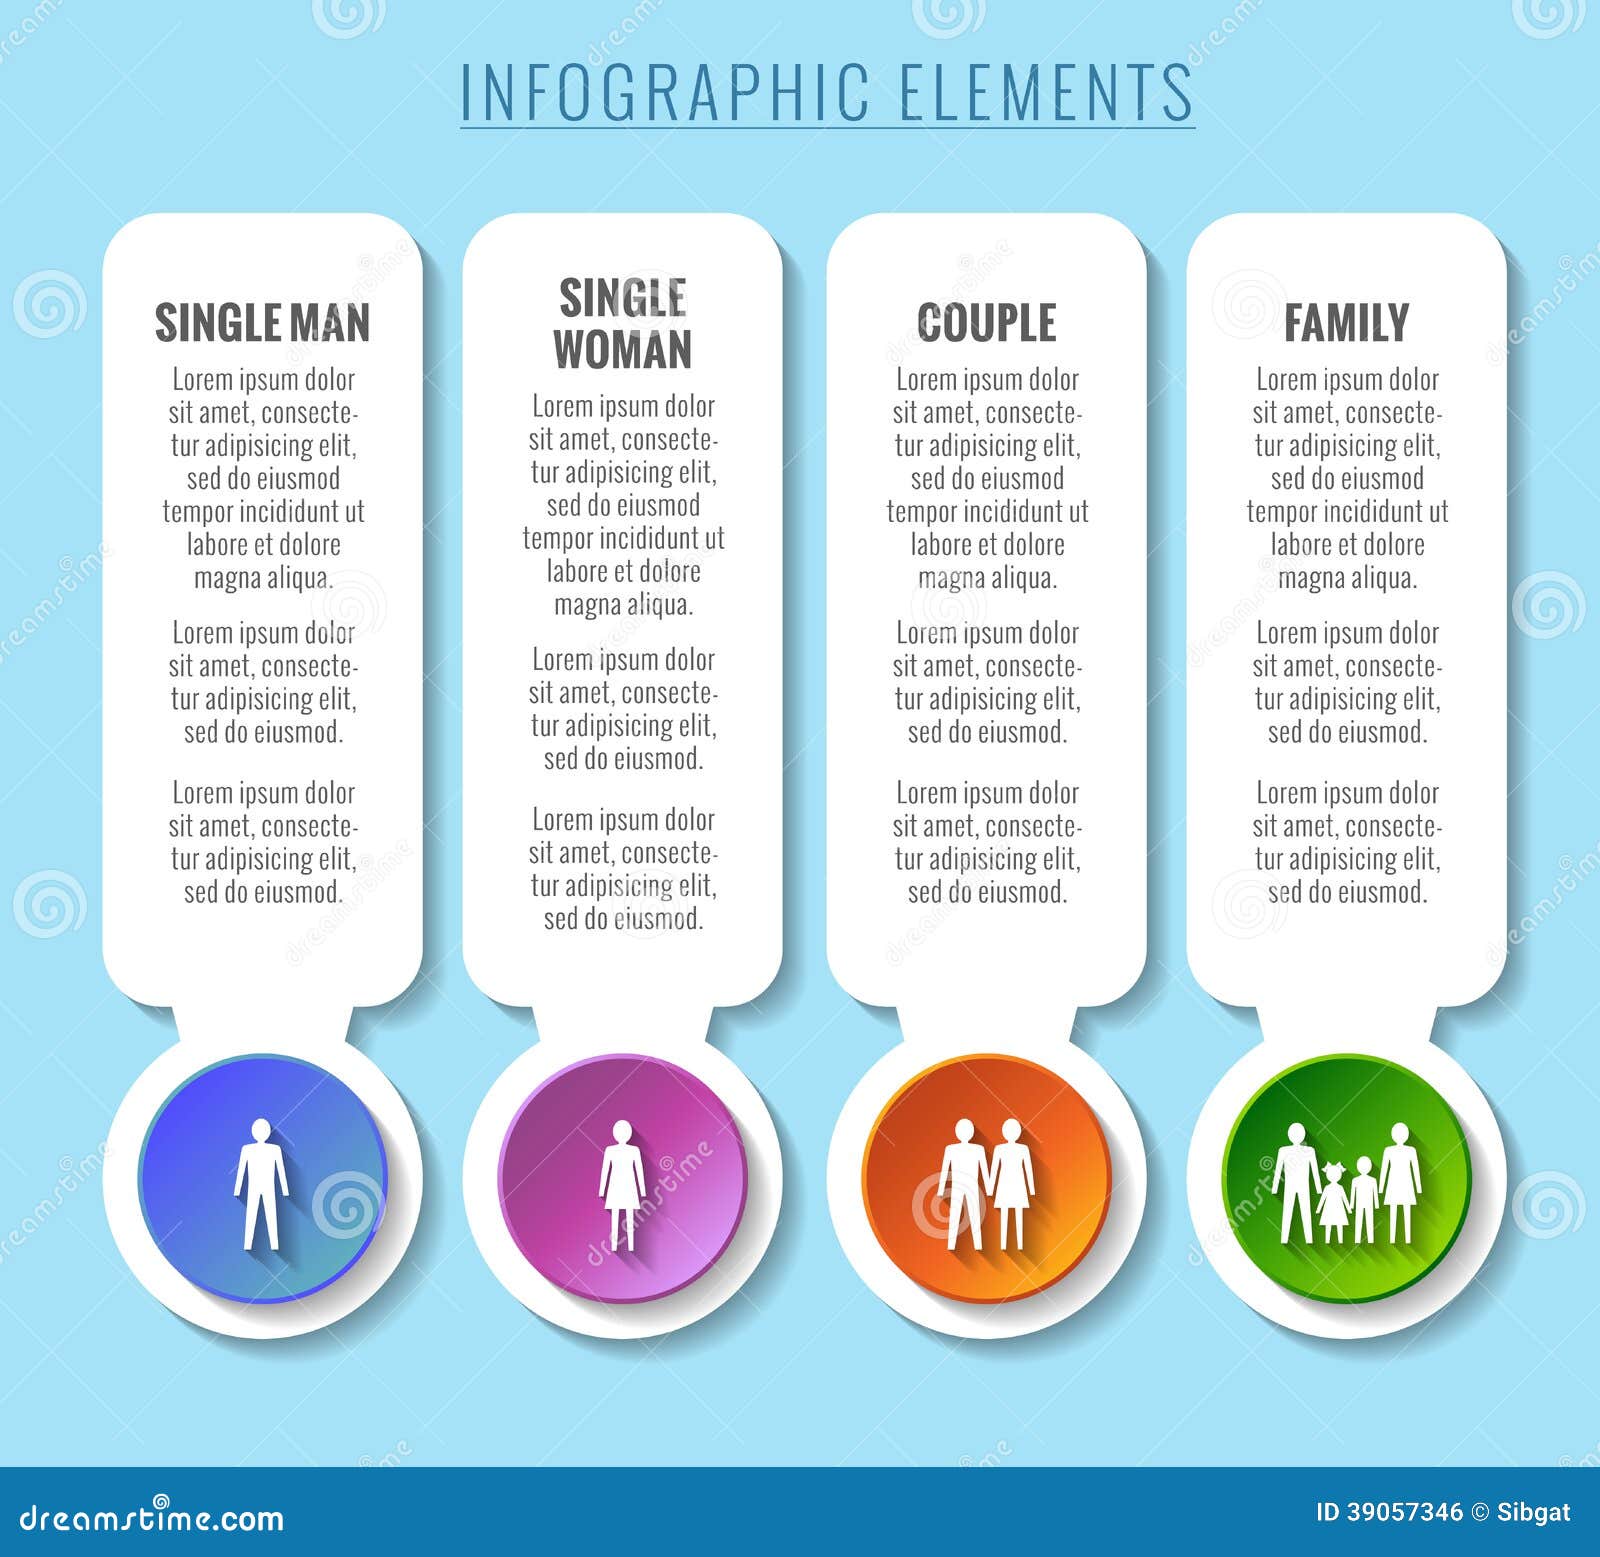 Infographic Elements. Relationship and Family Stock Vector ...